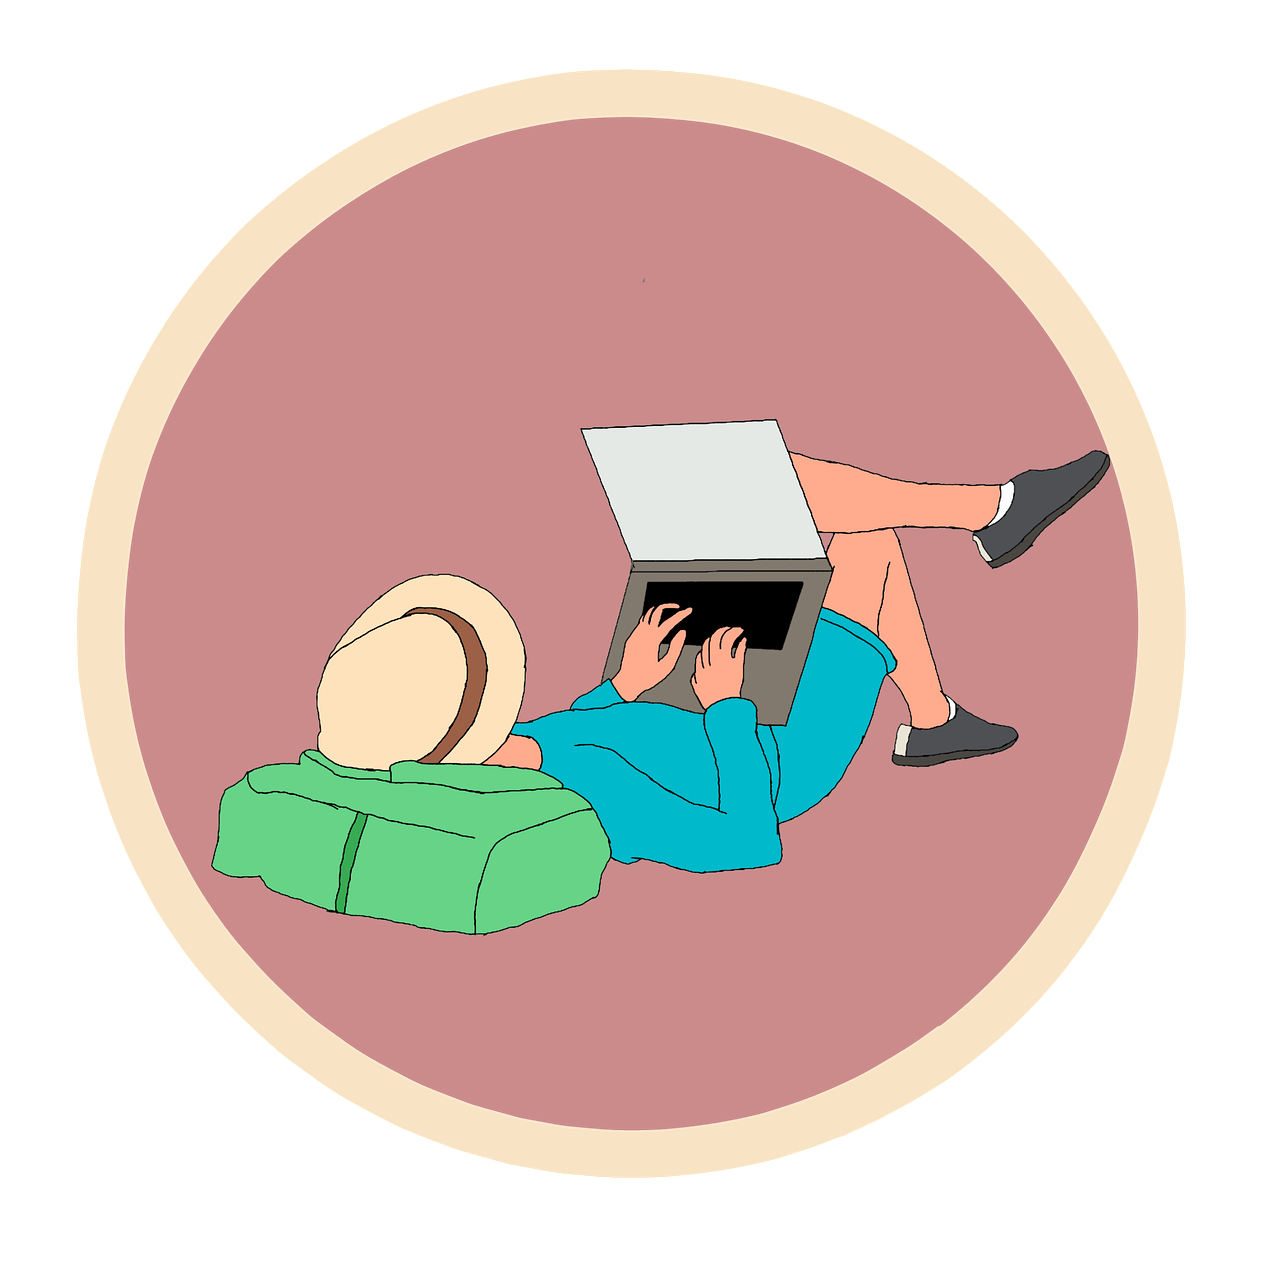 a person laying on the ground with a laptop, an illustration of, traveler, sticker illustration, woman with hat, everything enclosed in a circle